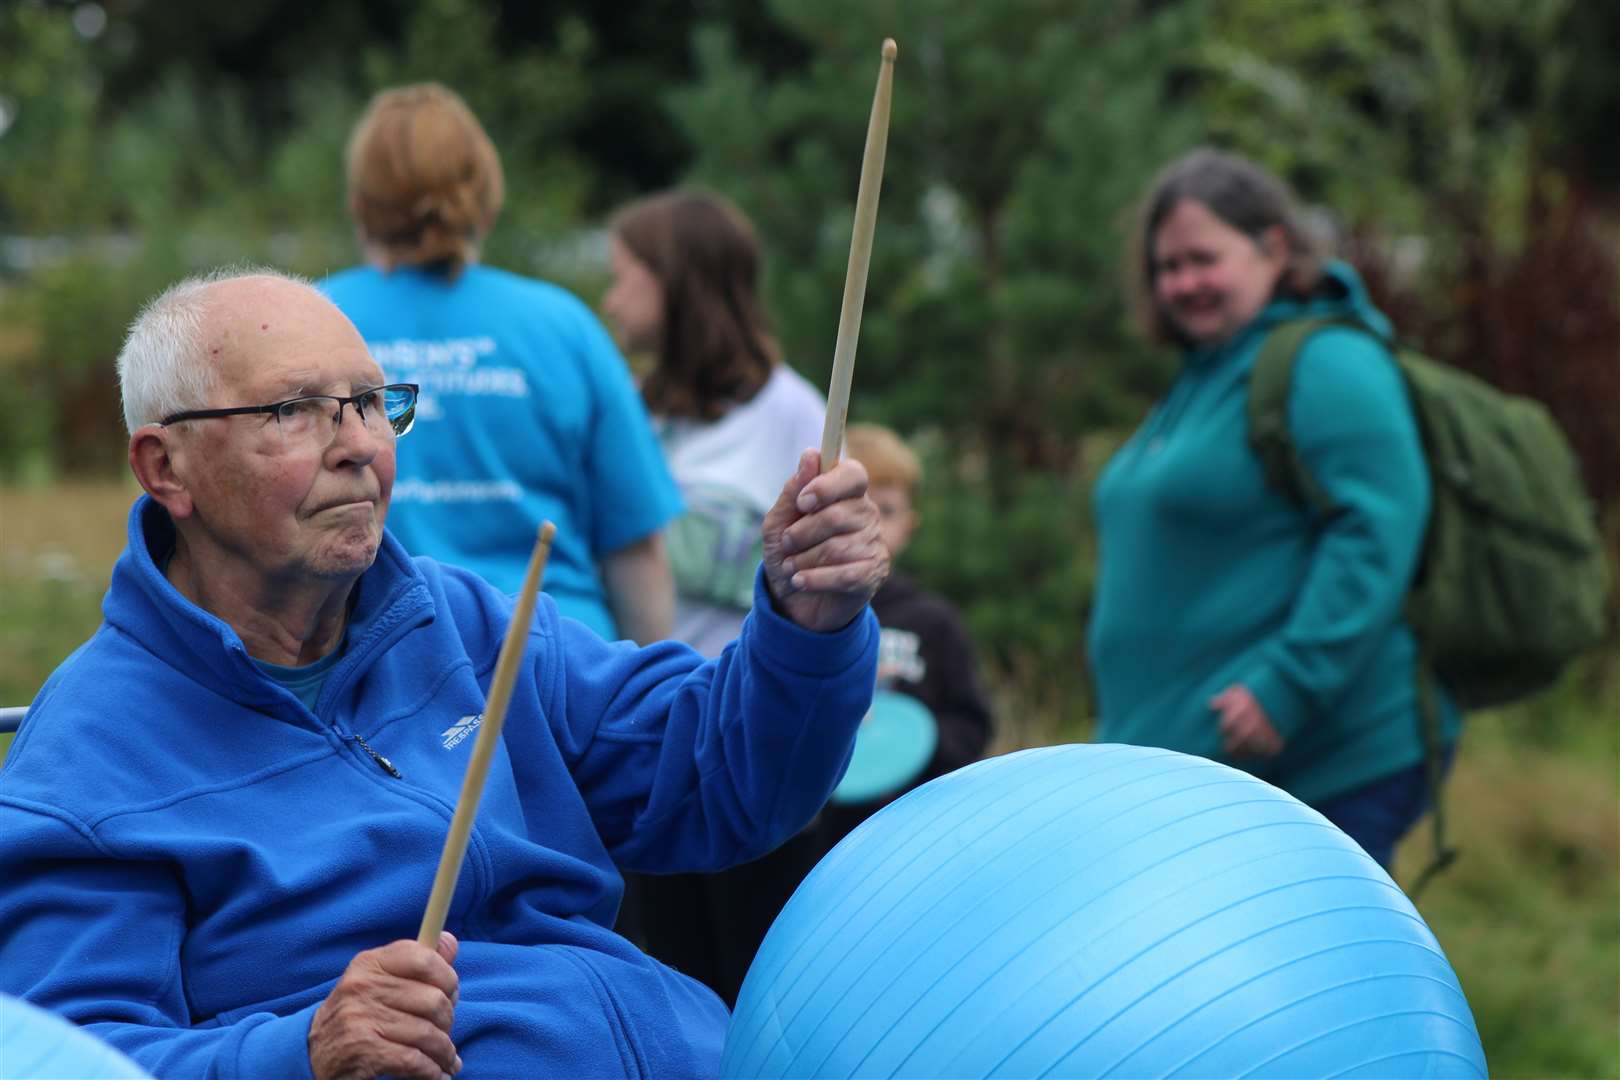 A village was set up at the start of the walk to share information and for other fun activities. Pictures: Iain Stephen Morrison/Parkinson's UK.